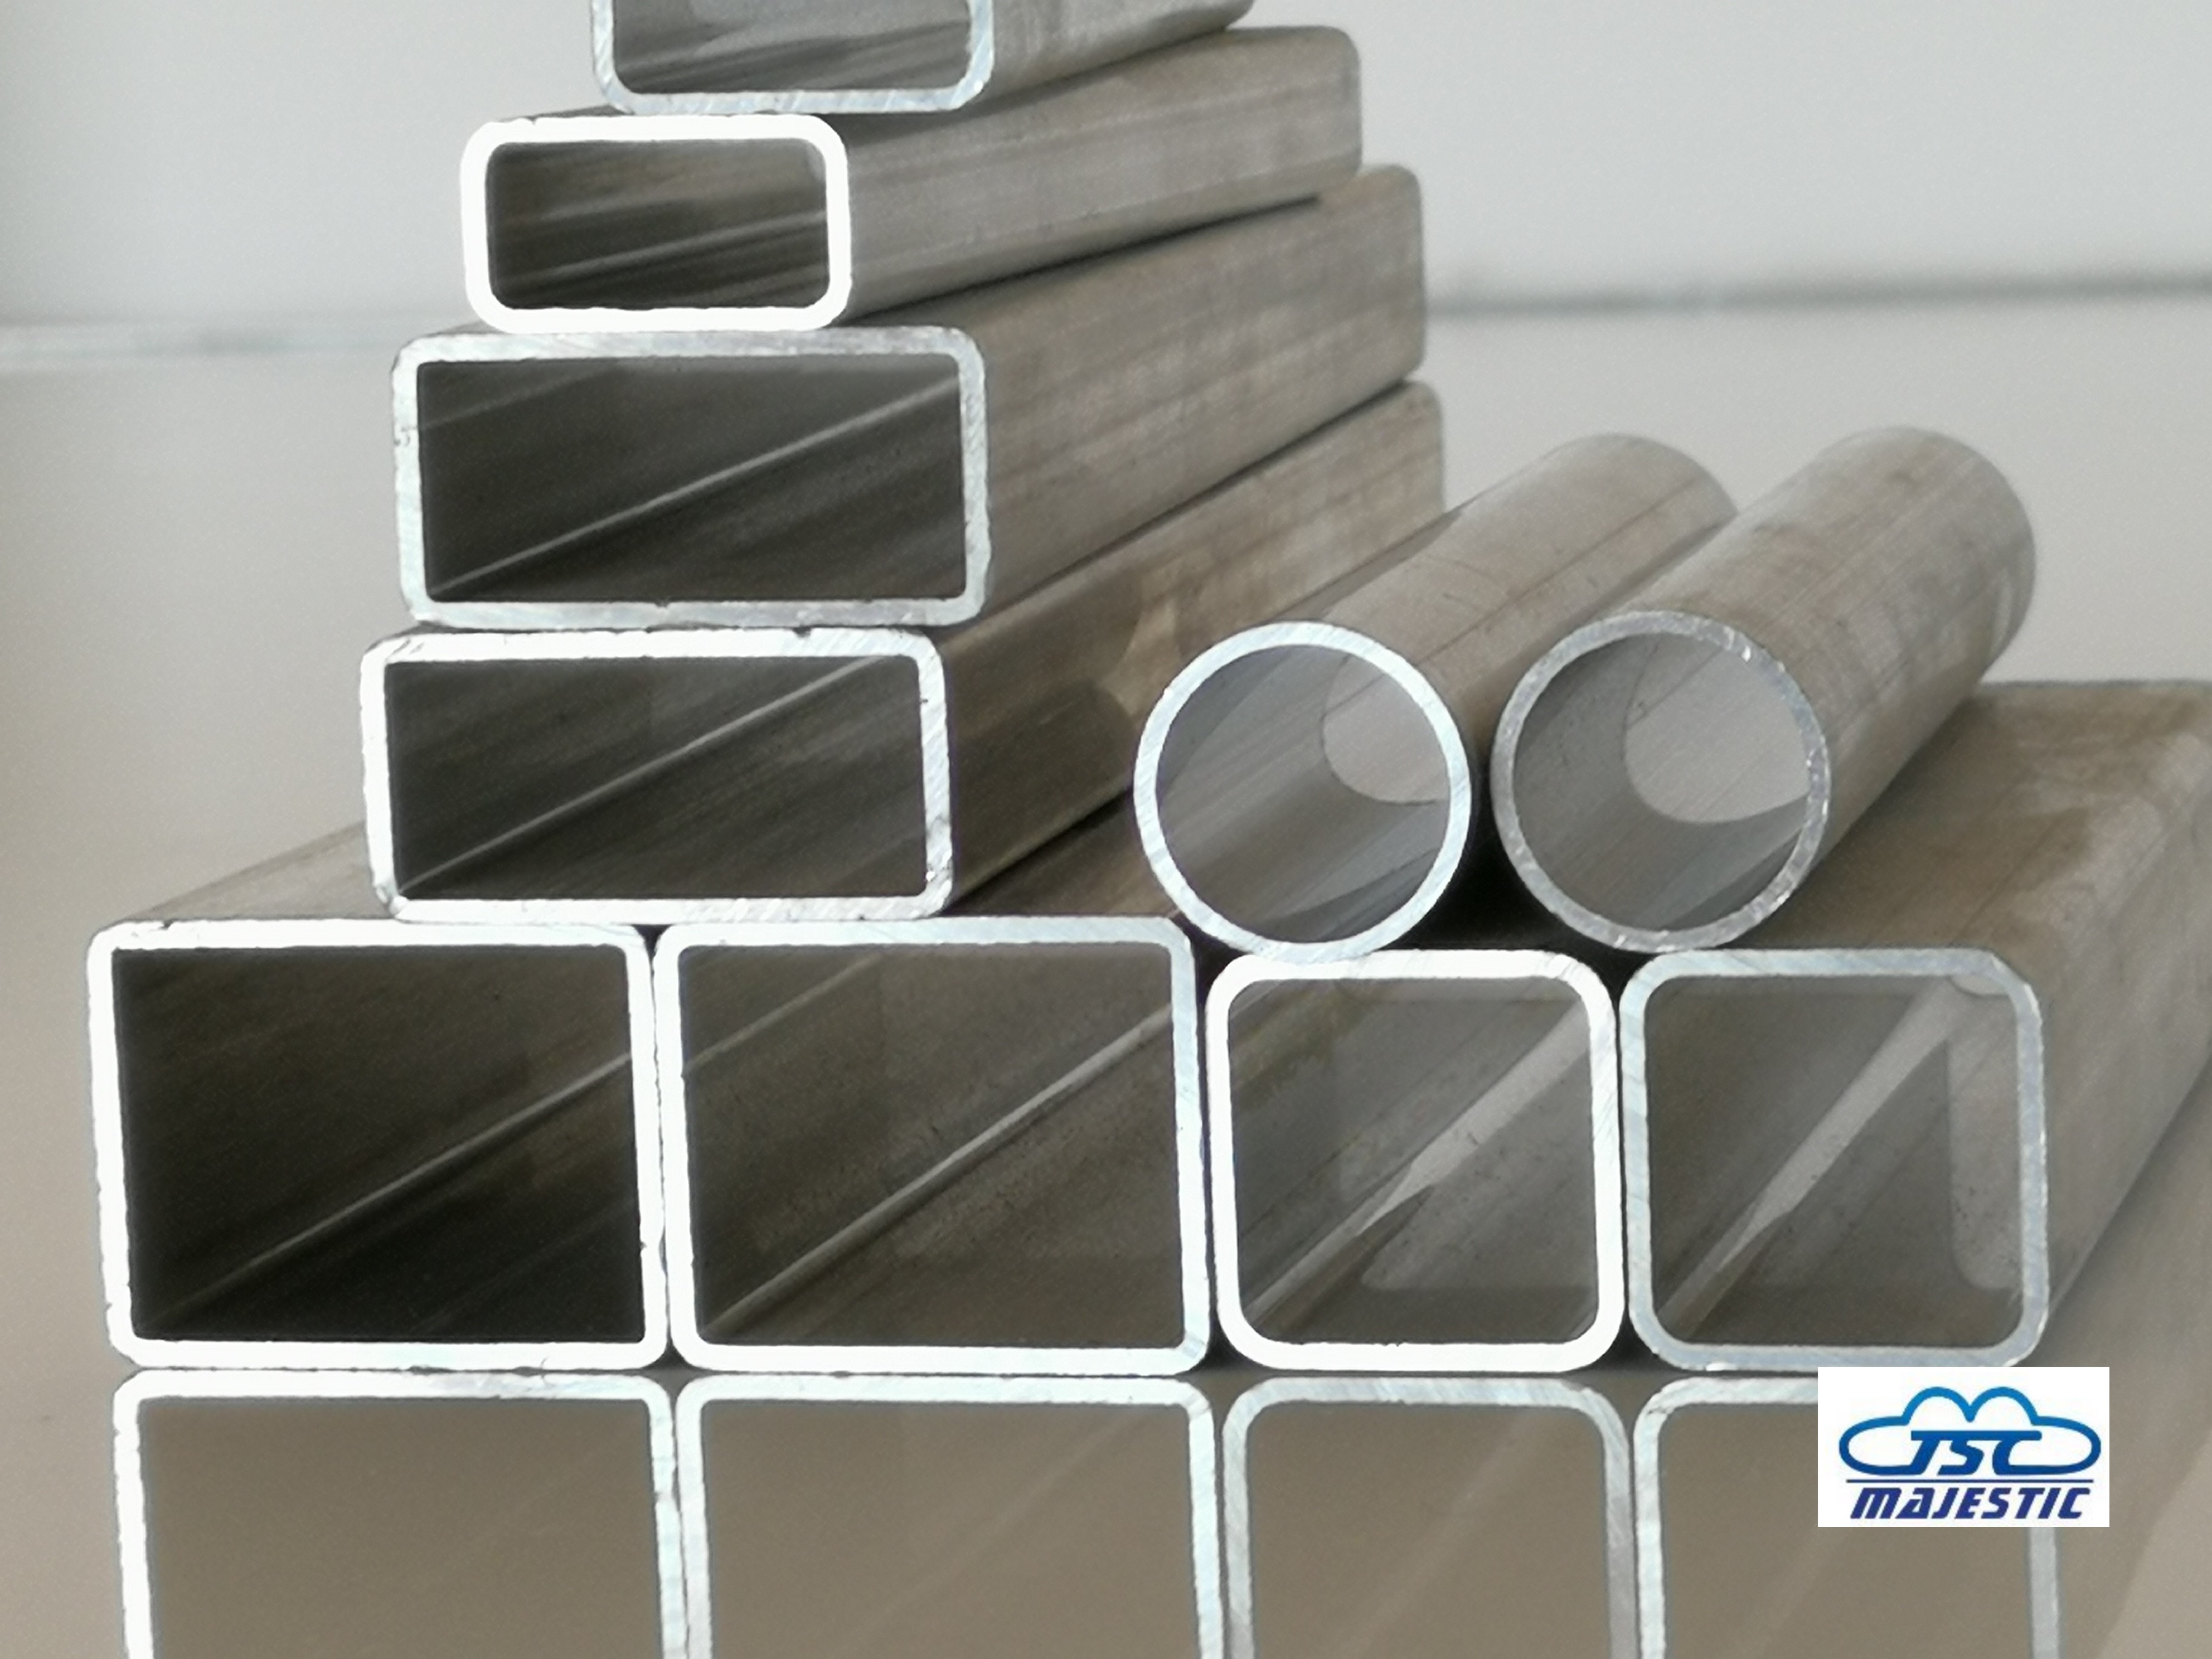 The difference between extruded aluminum tube and seamless steel tube